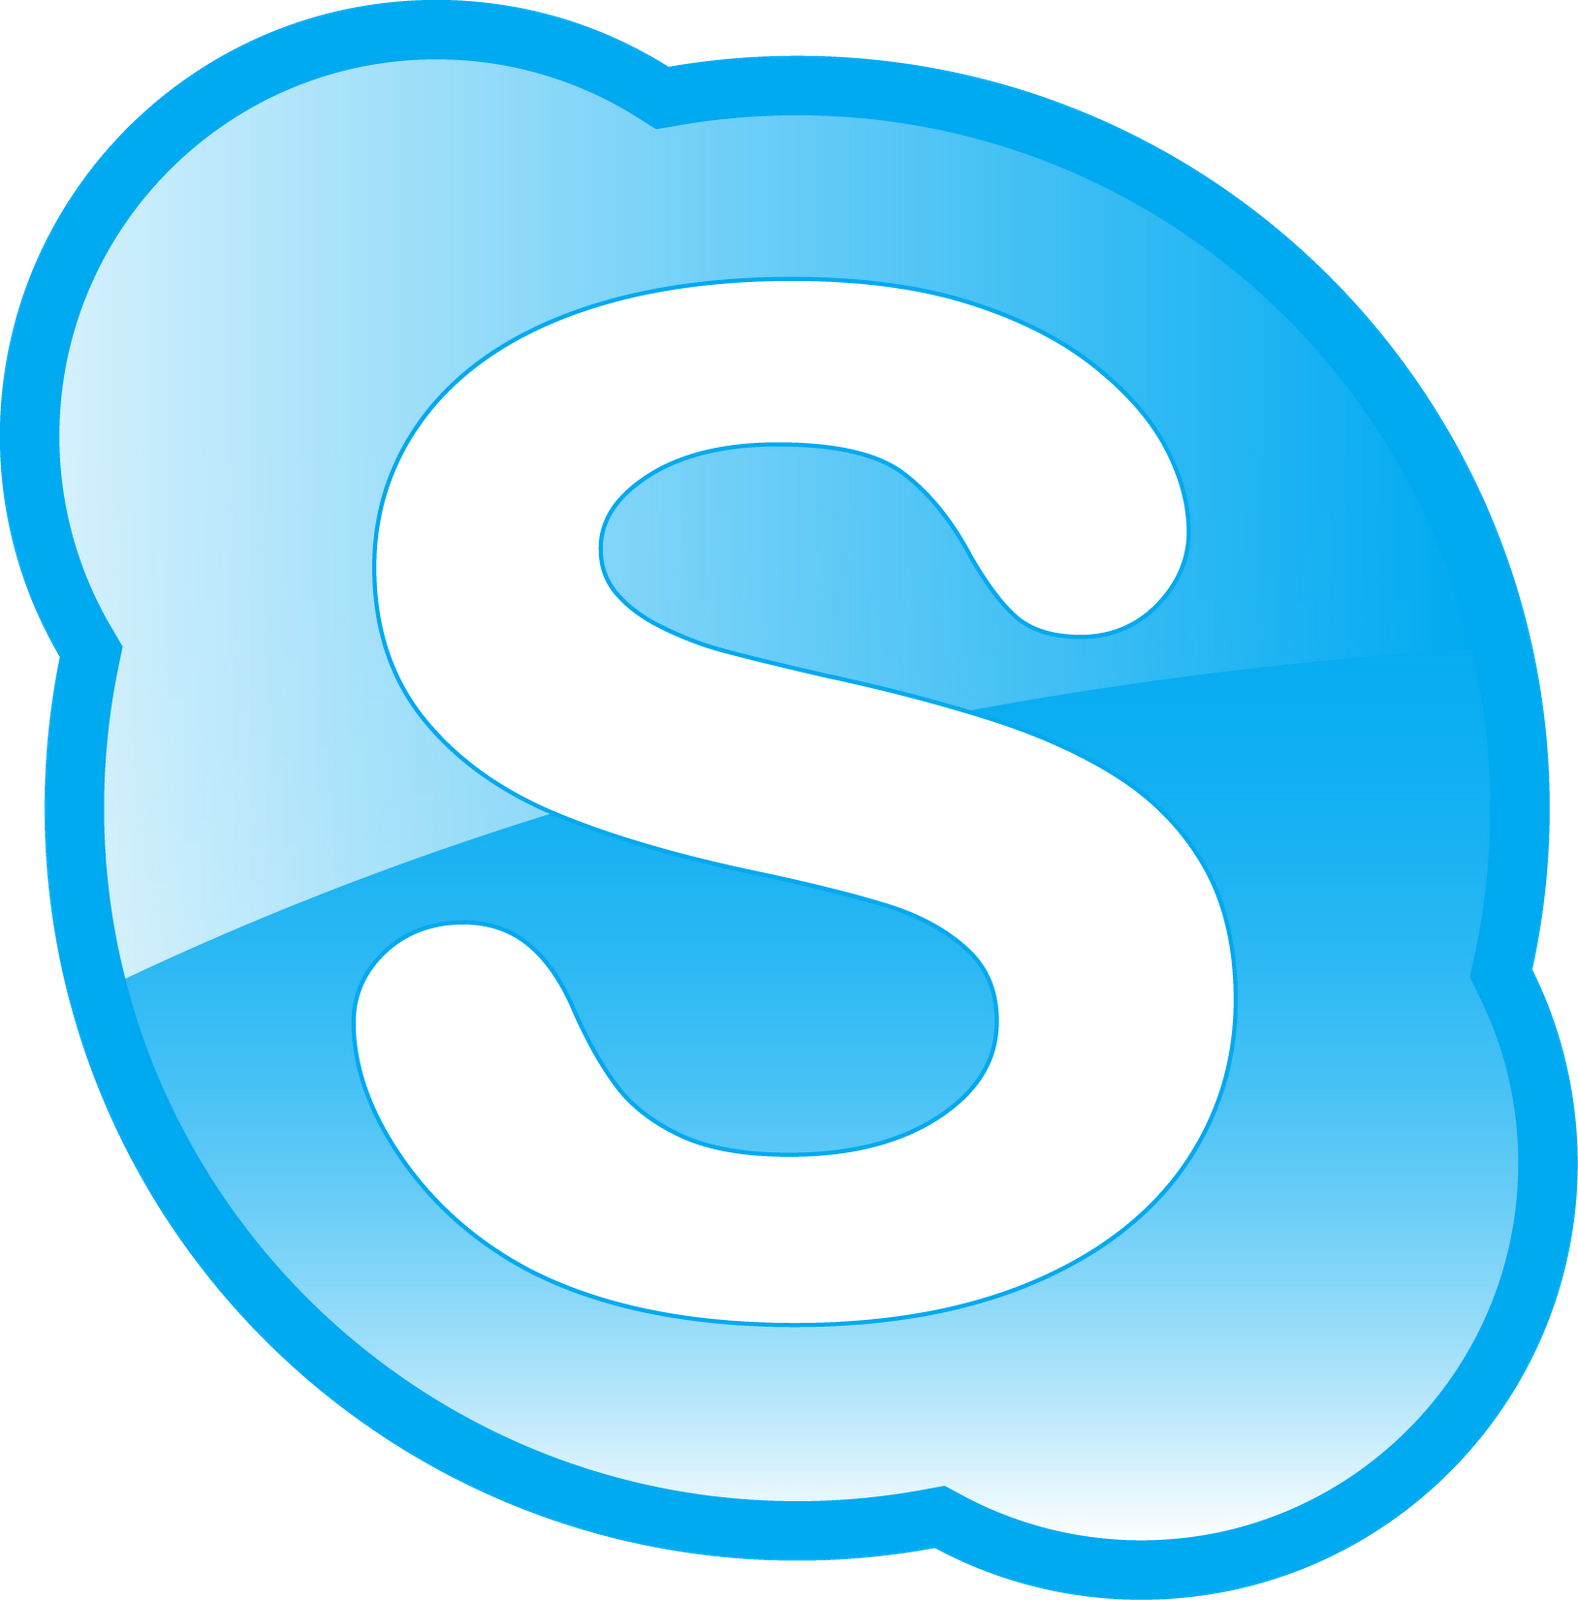 download skype for business